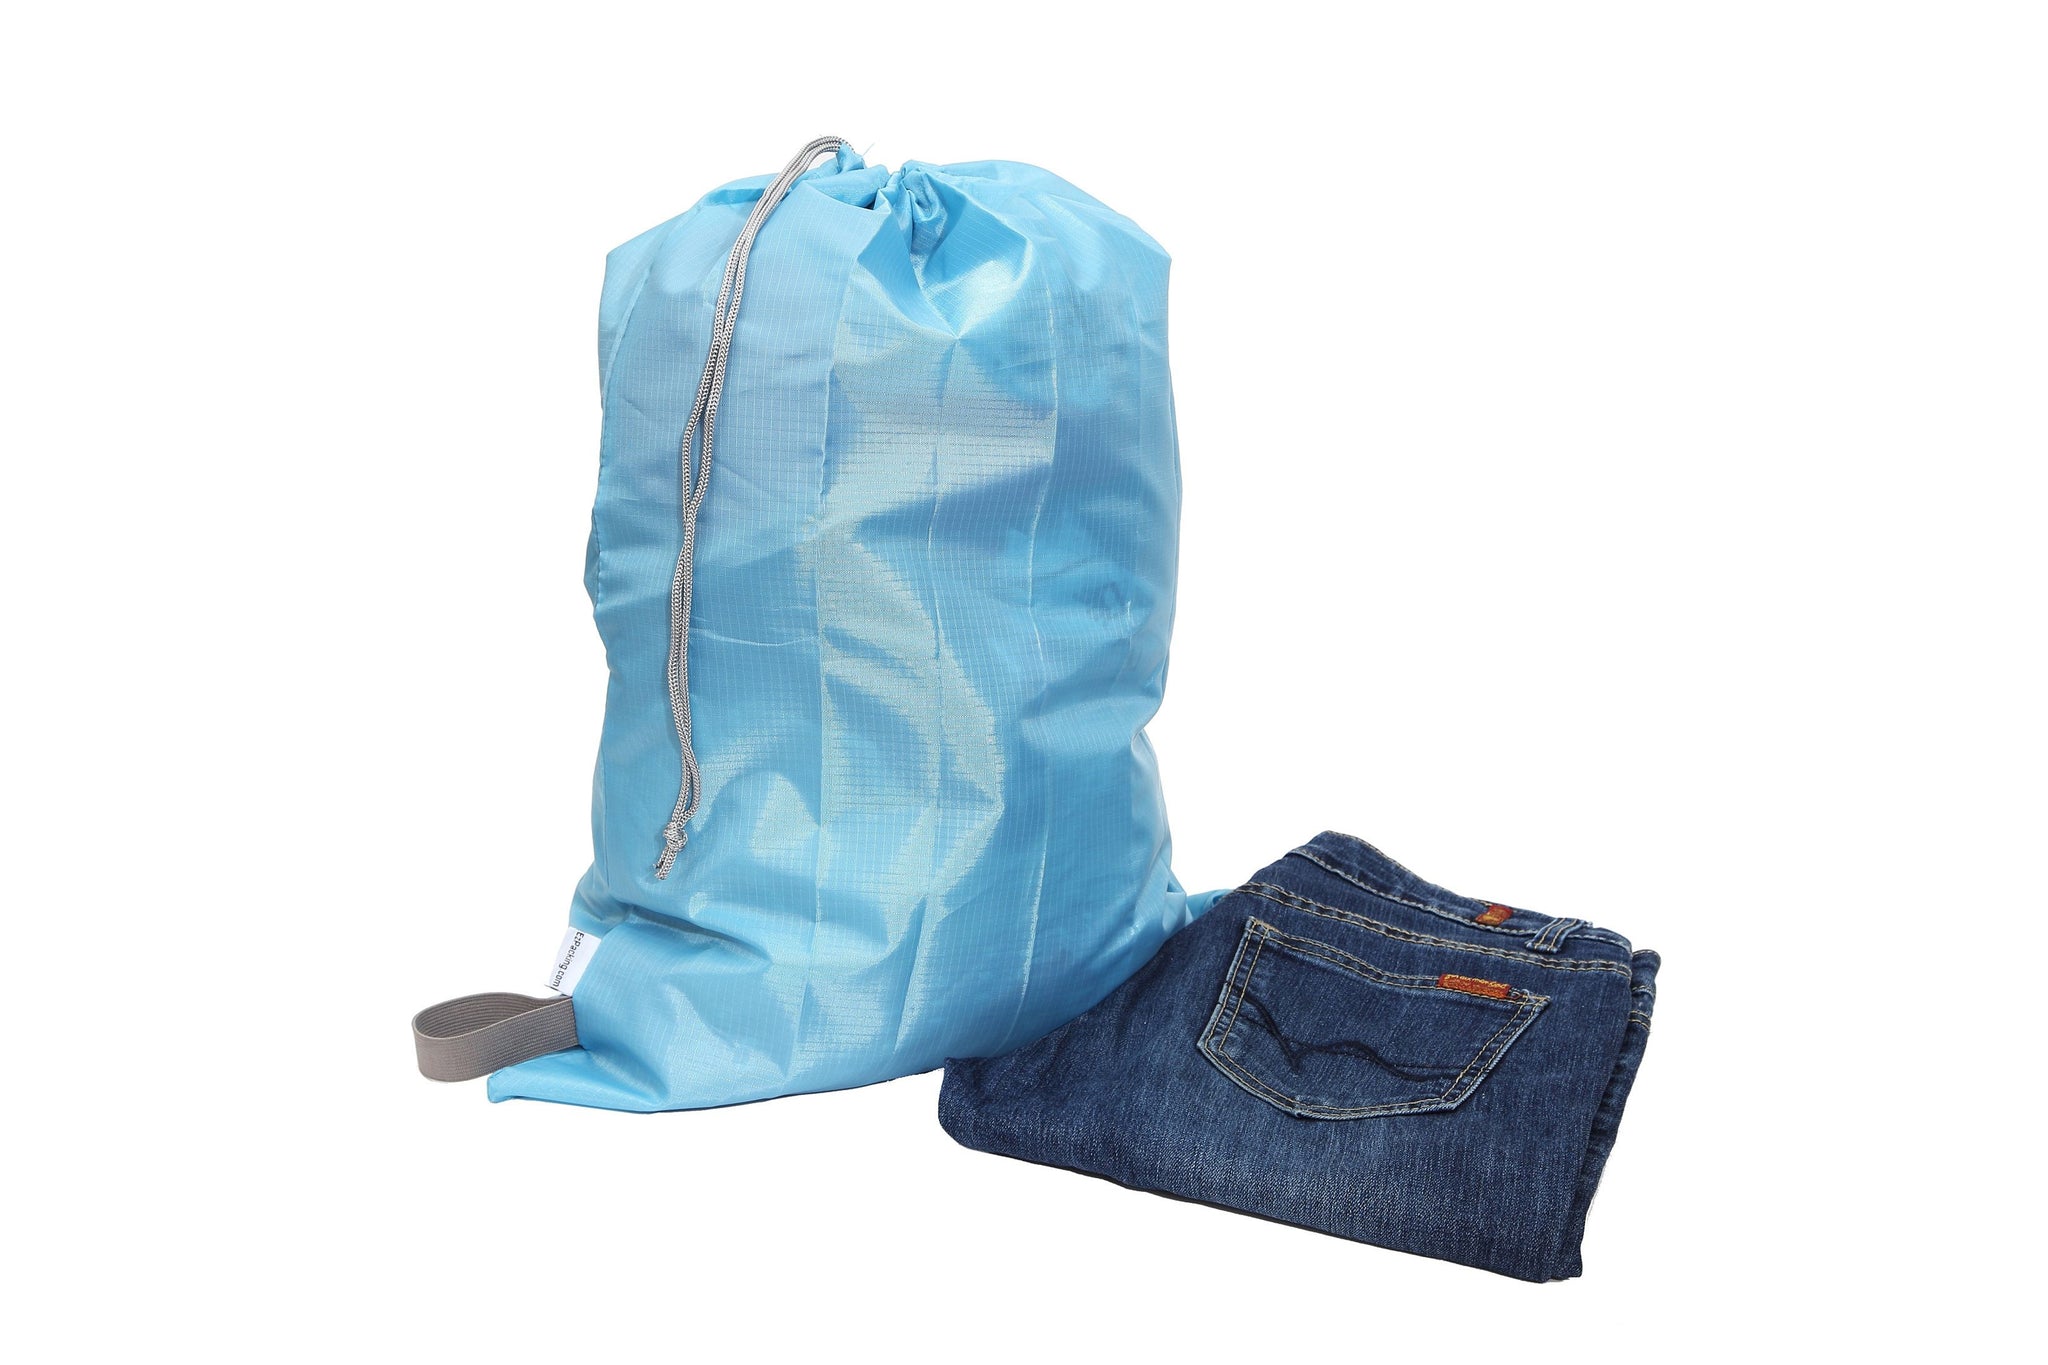 Travel Laundry Bag for Dirty Clothes - Small, Packable and Washable Hamper  Pouch for Suitcase - With Drawstring and Foldable into Compact Size (Blue)  – EzPacking